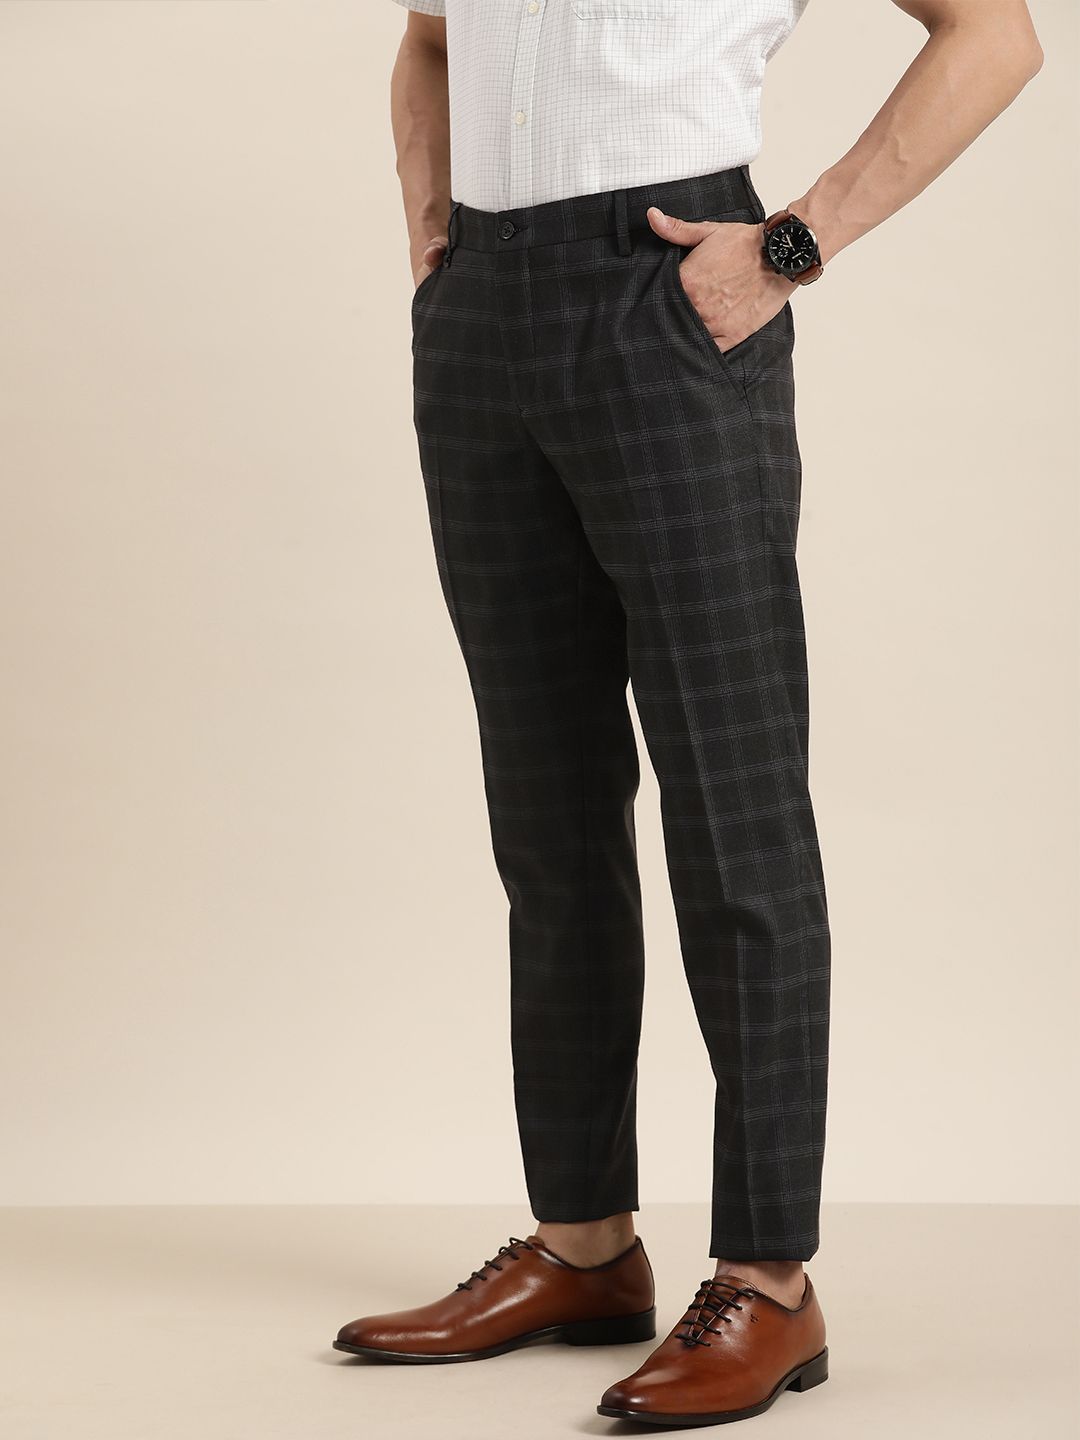 INVICTUS Men Charcoal Grey Checked Slim Fit Crop Trousers